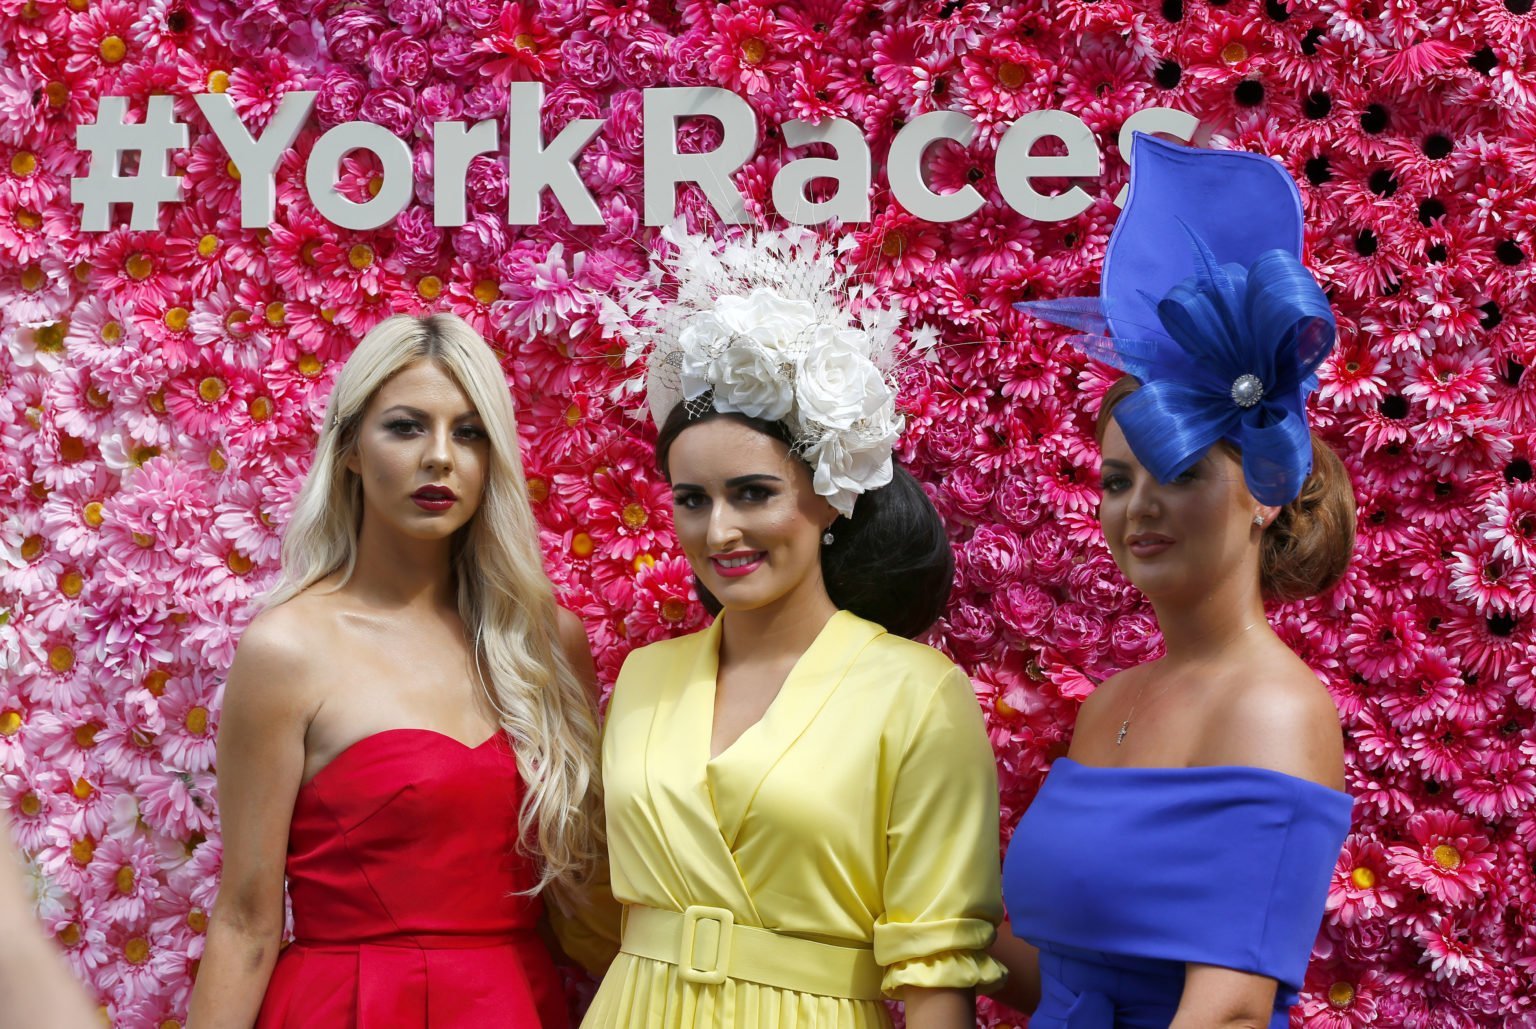 What to wear At York